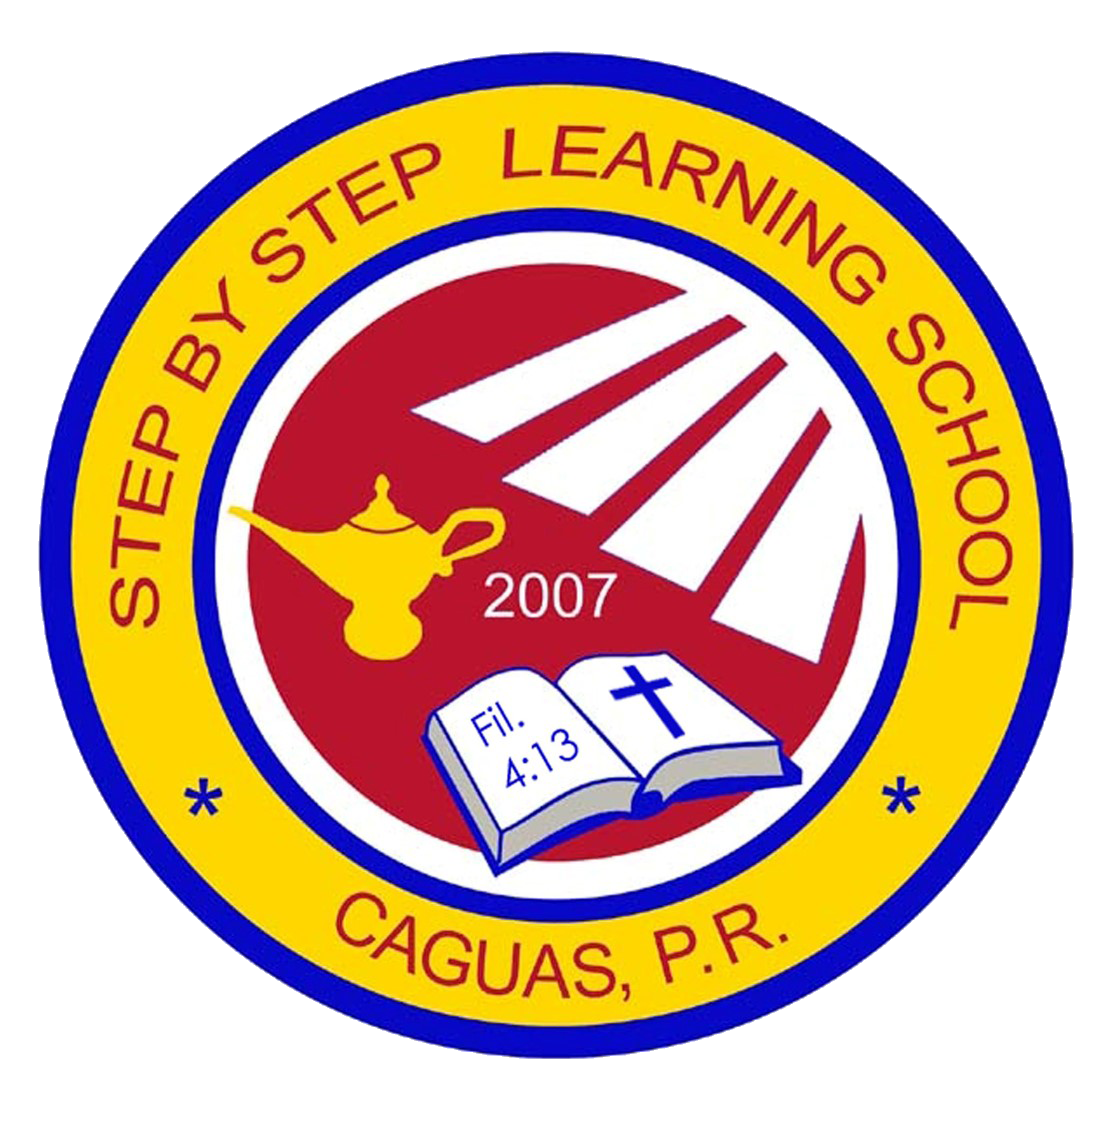 Step by Step Learning School